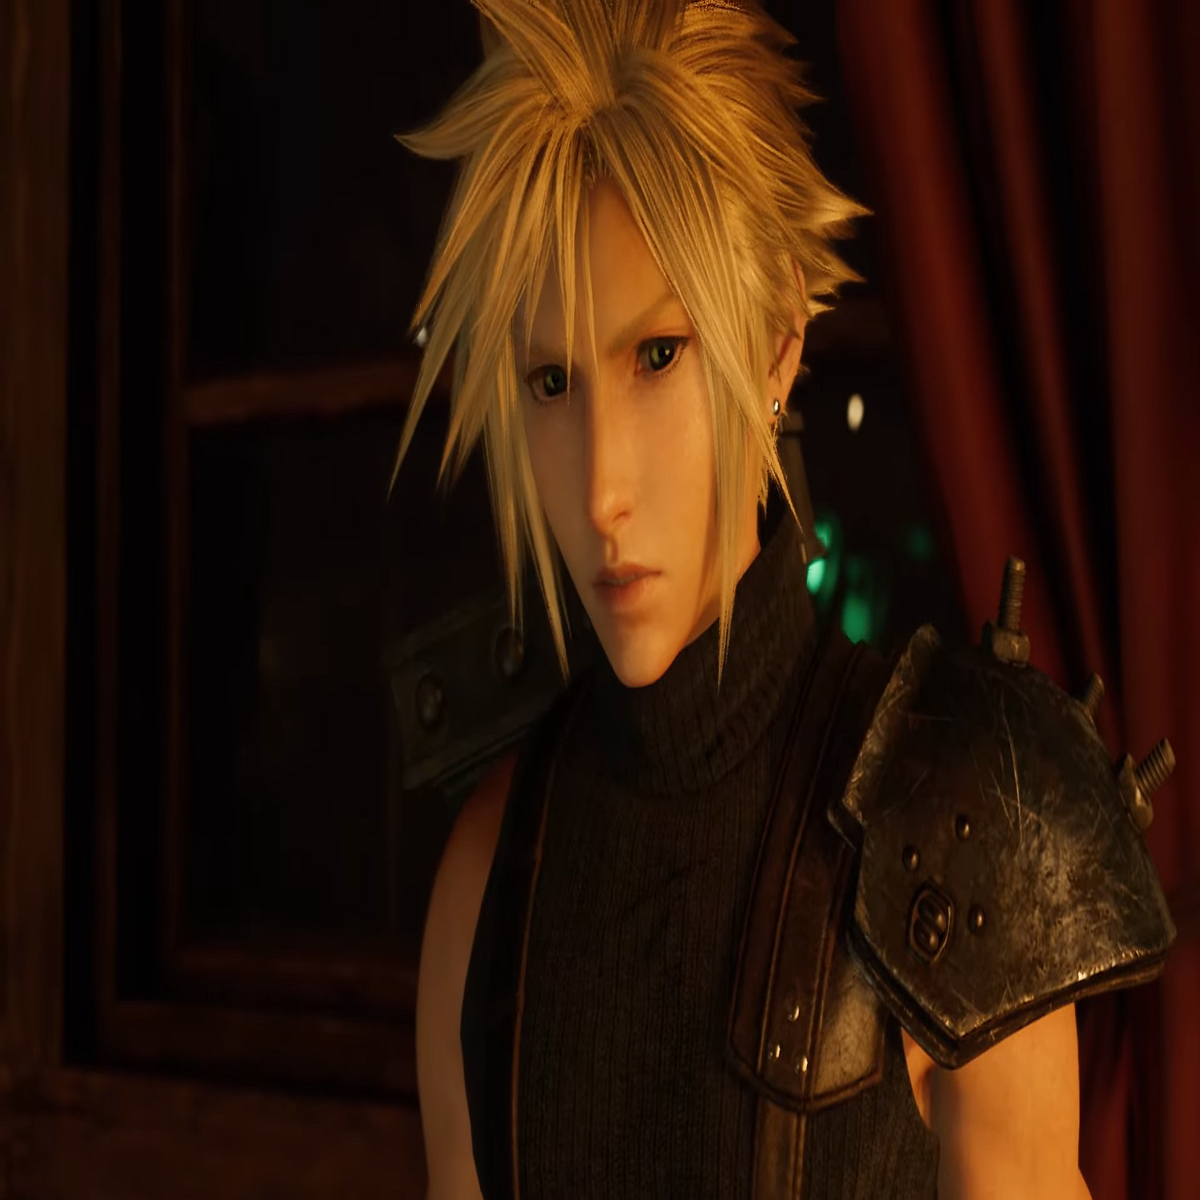 Final Fantasy VII Rebirth Gets New Story Trailer, Release Date